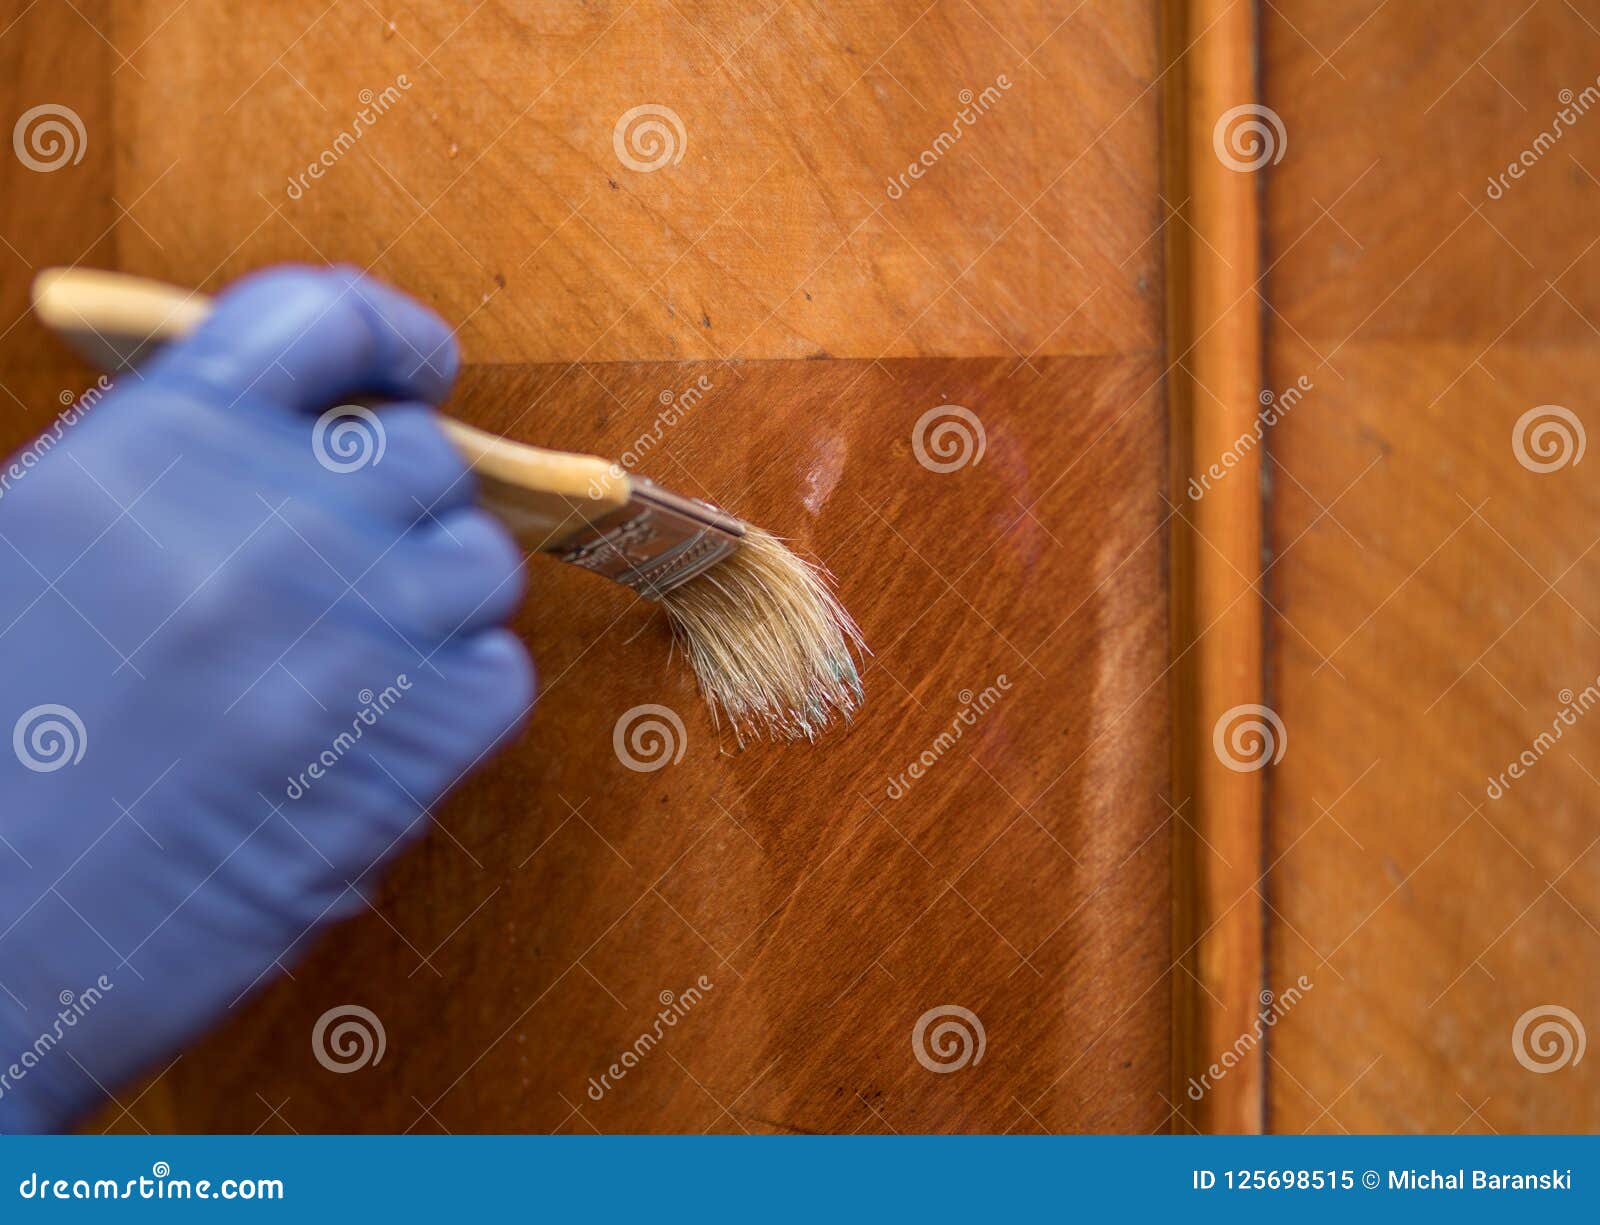 Removing Wax From Old Furniture Stock Image Image Of Tools